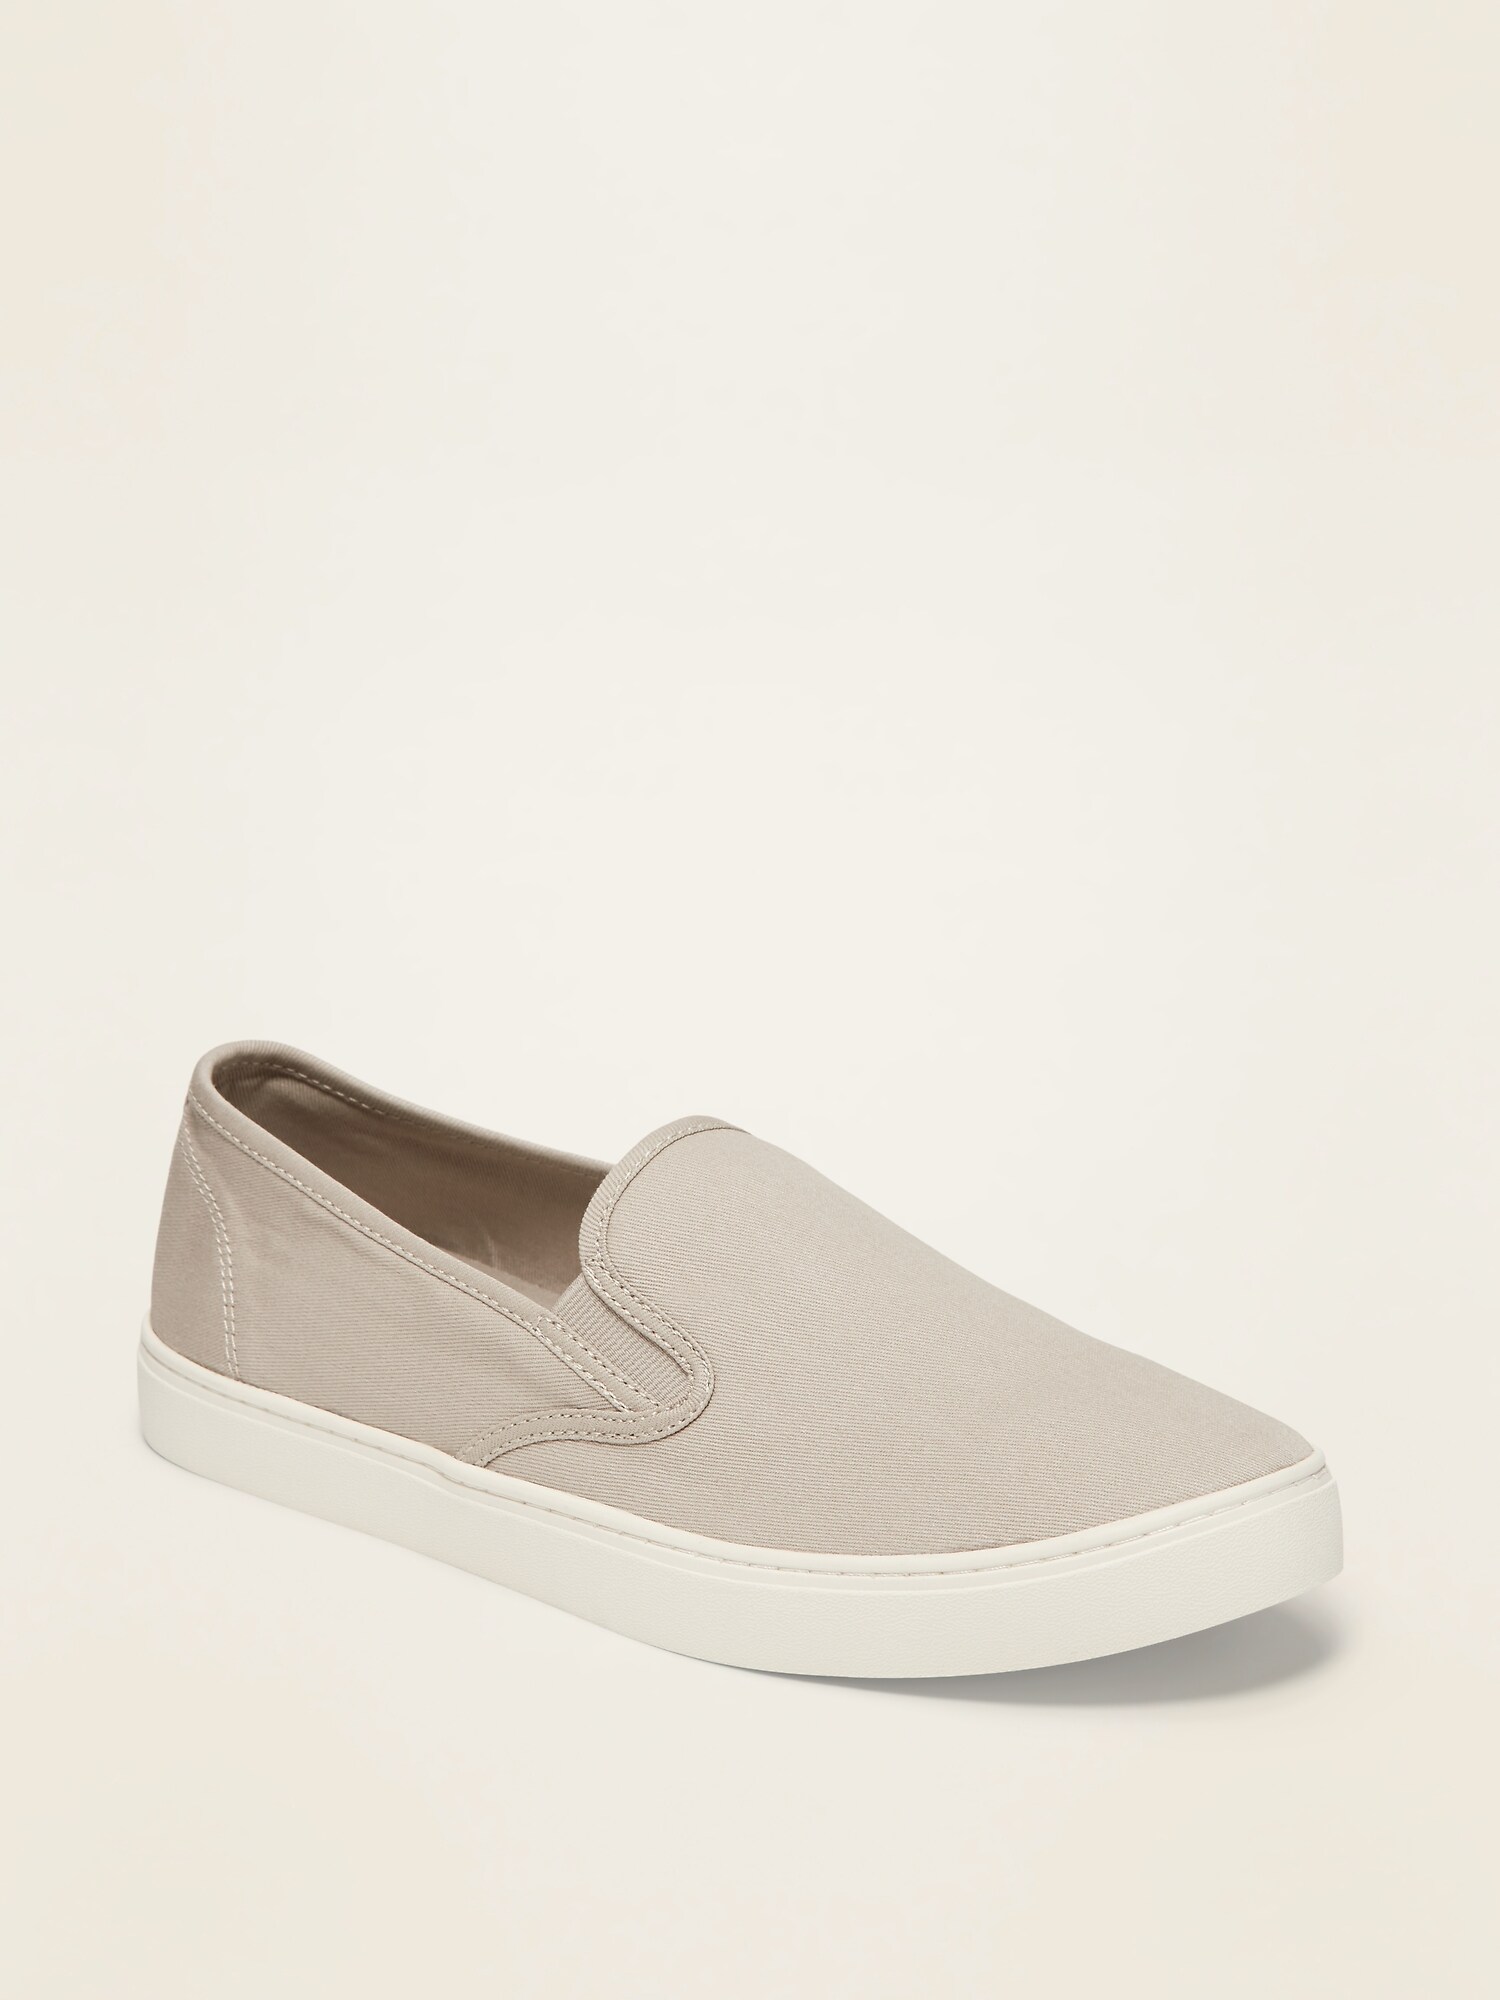 old navy canvas slip ons